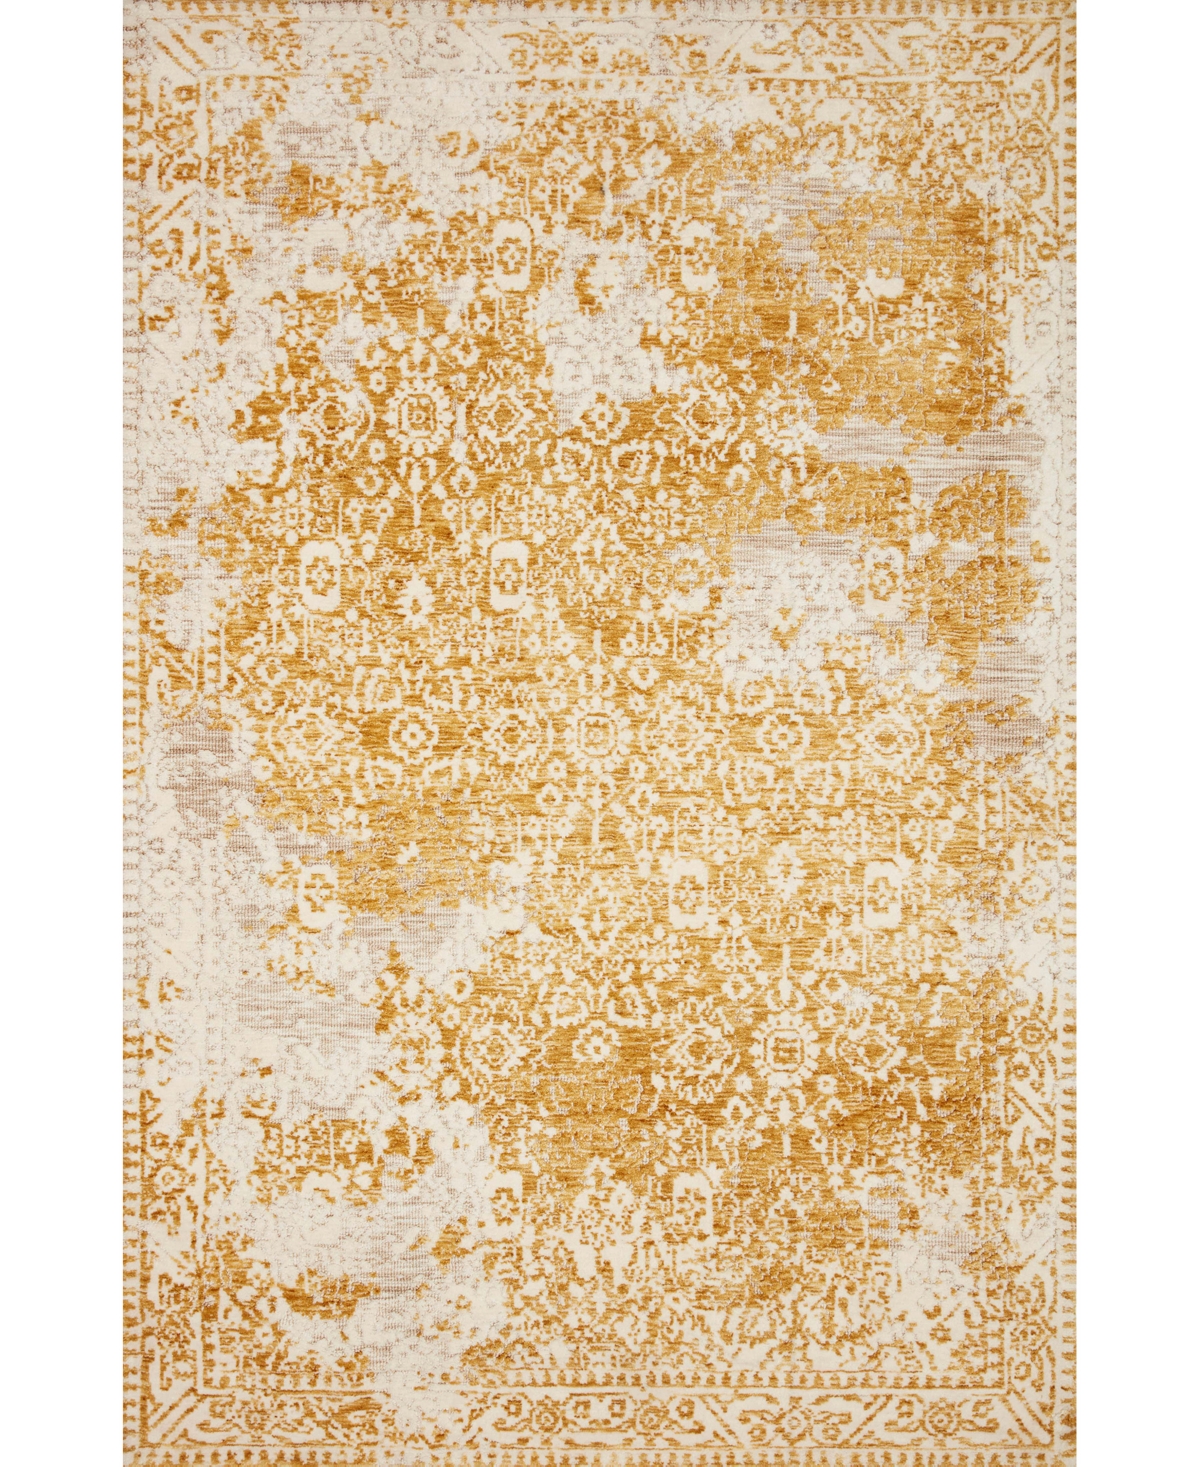 Magnolia Home By Joanna Gaines X Loloi Lindsay Lis-01 7'9" X 9'9" Area Rug In Gold,white